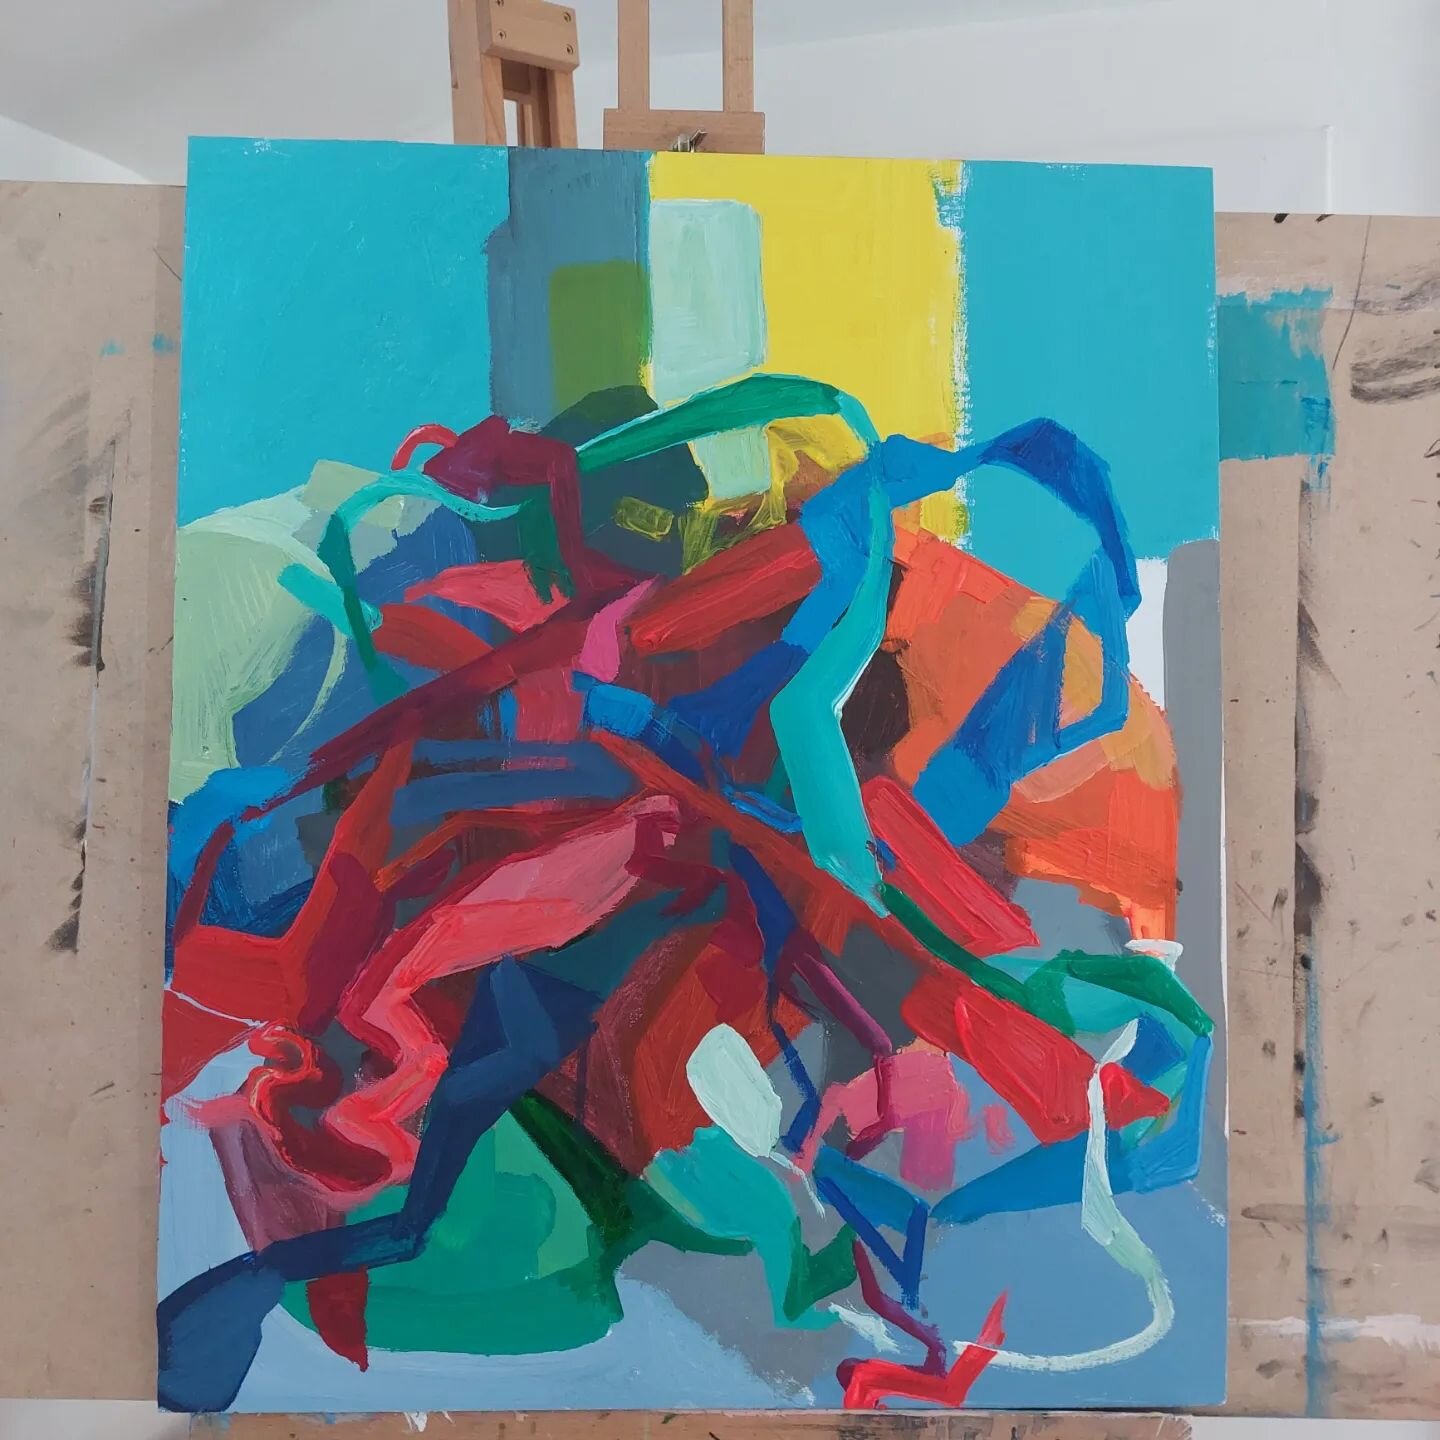 So on a dreary day in the UK here's my colourful demo painted in my Still life to Abstraction class this morning... #ribbons #abstractpainting #abstraction #shape #colour #movement #chaos #artclass #artstudio #atelier #artworkshop #learntopaint #rutl